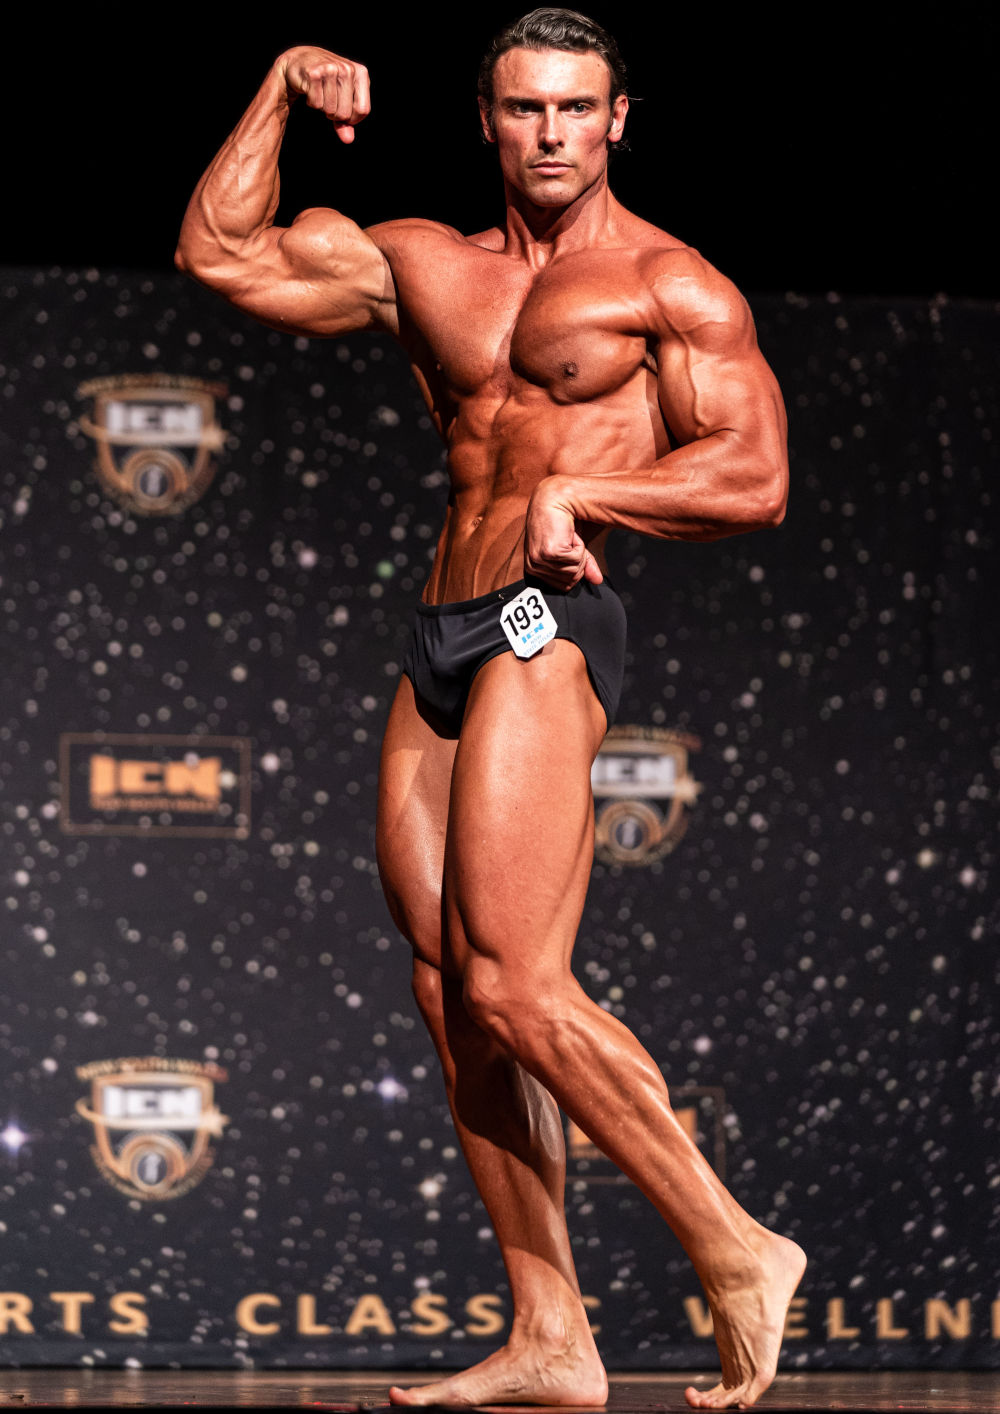 Getting Bodybuilding Clients Competition Ready - NASM